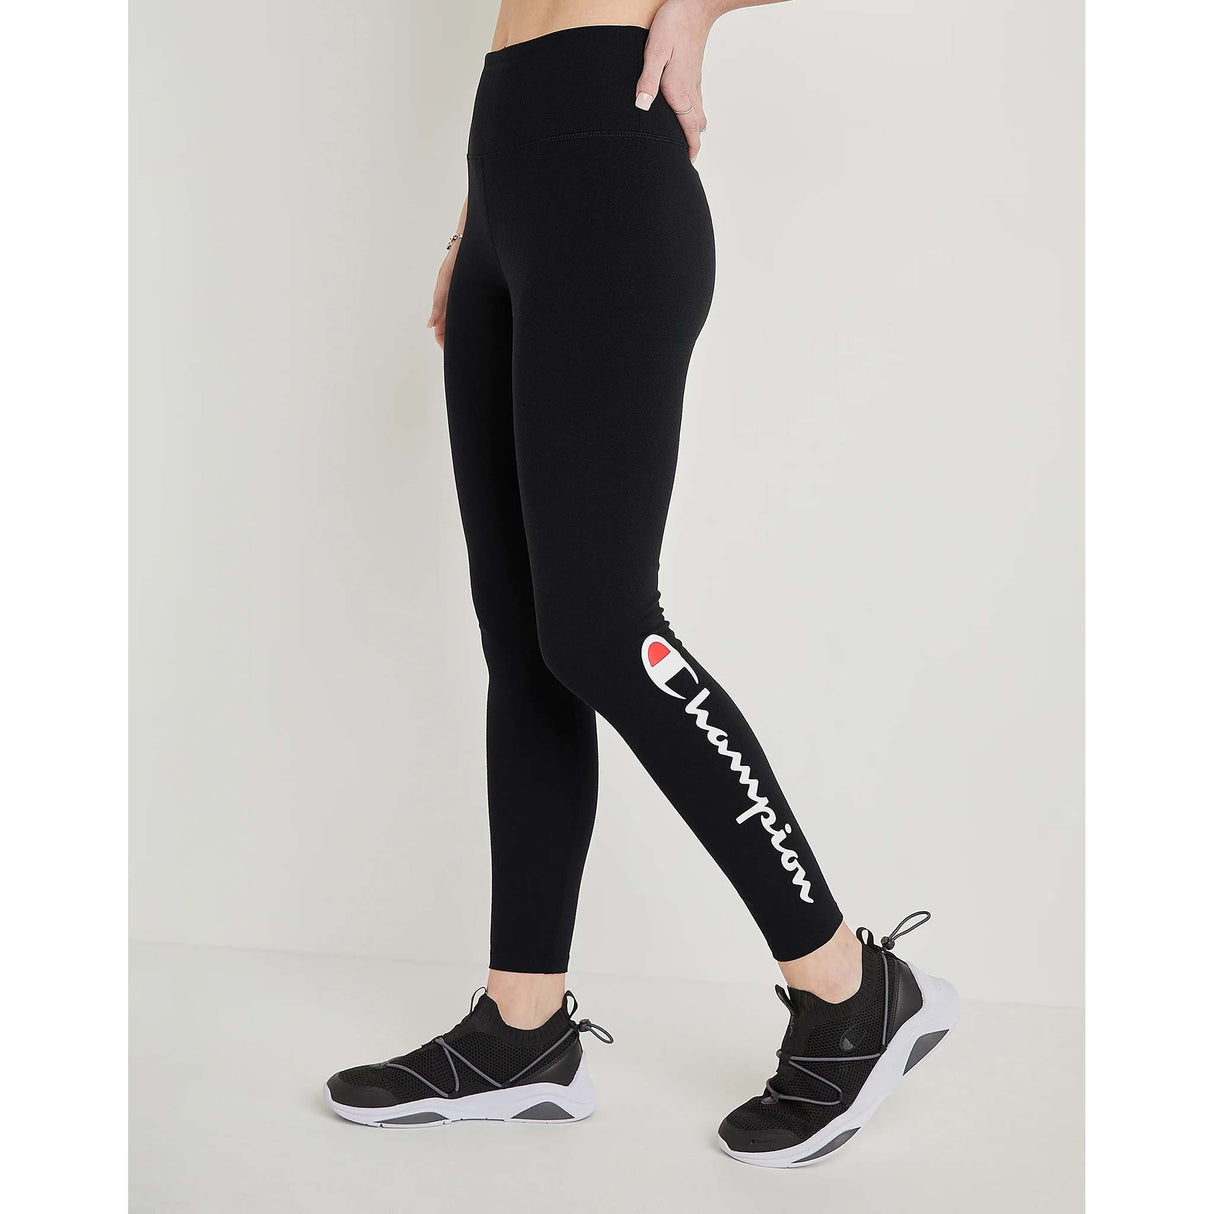 Champion Authentic 7/8 Tight Graphic leggings noir femme lateral